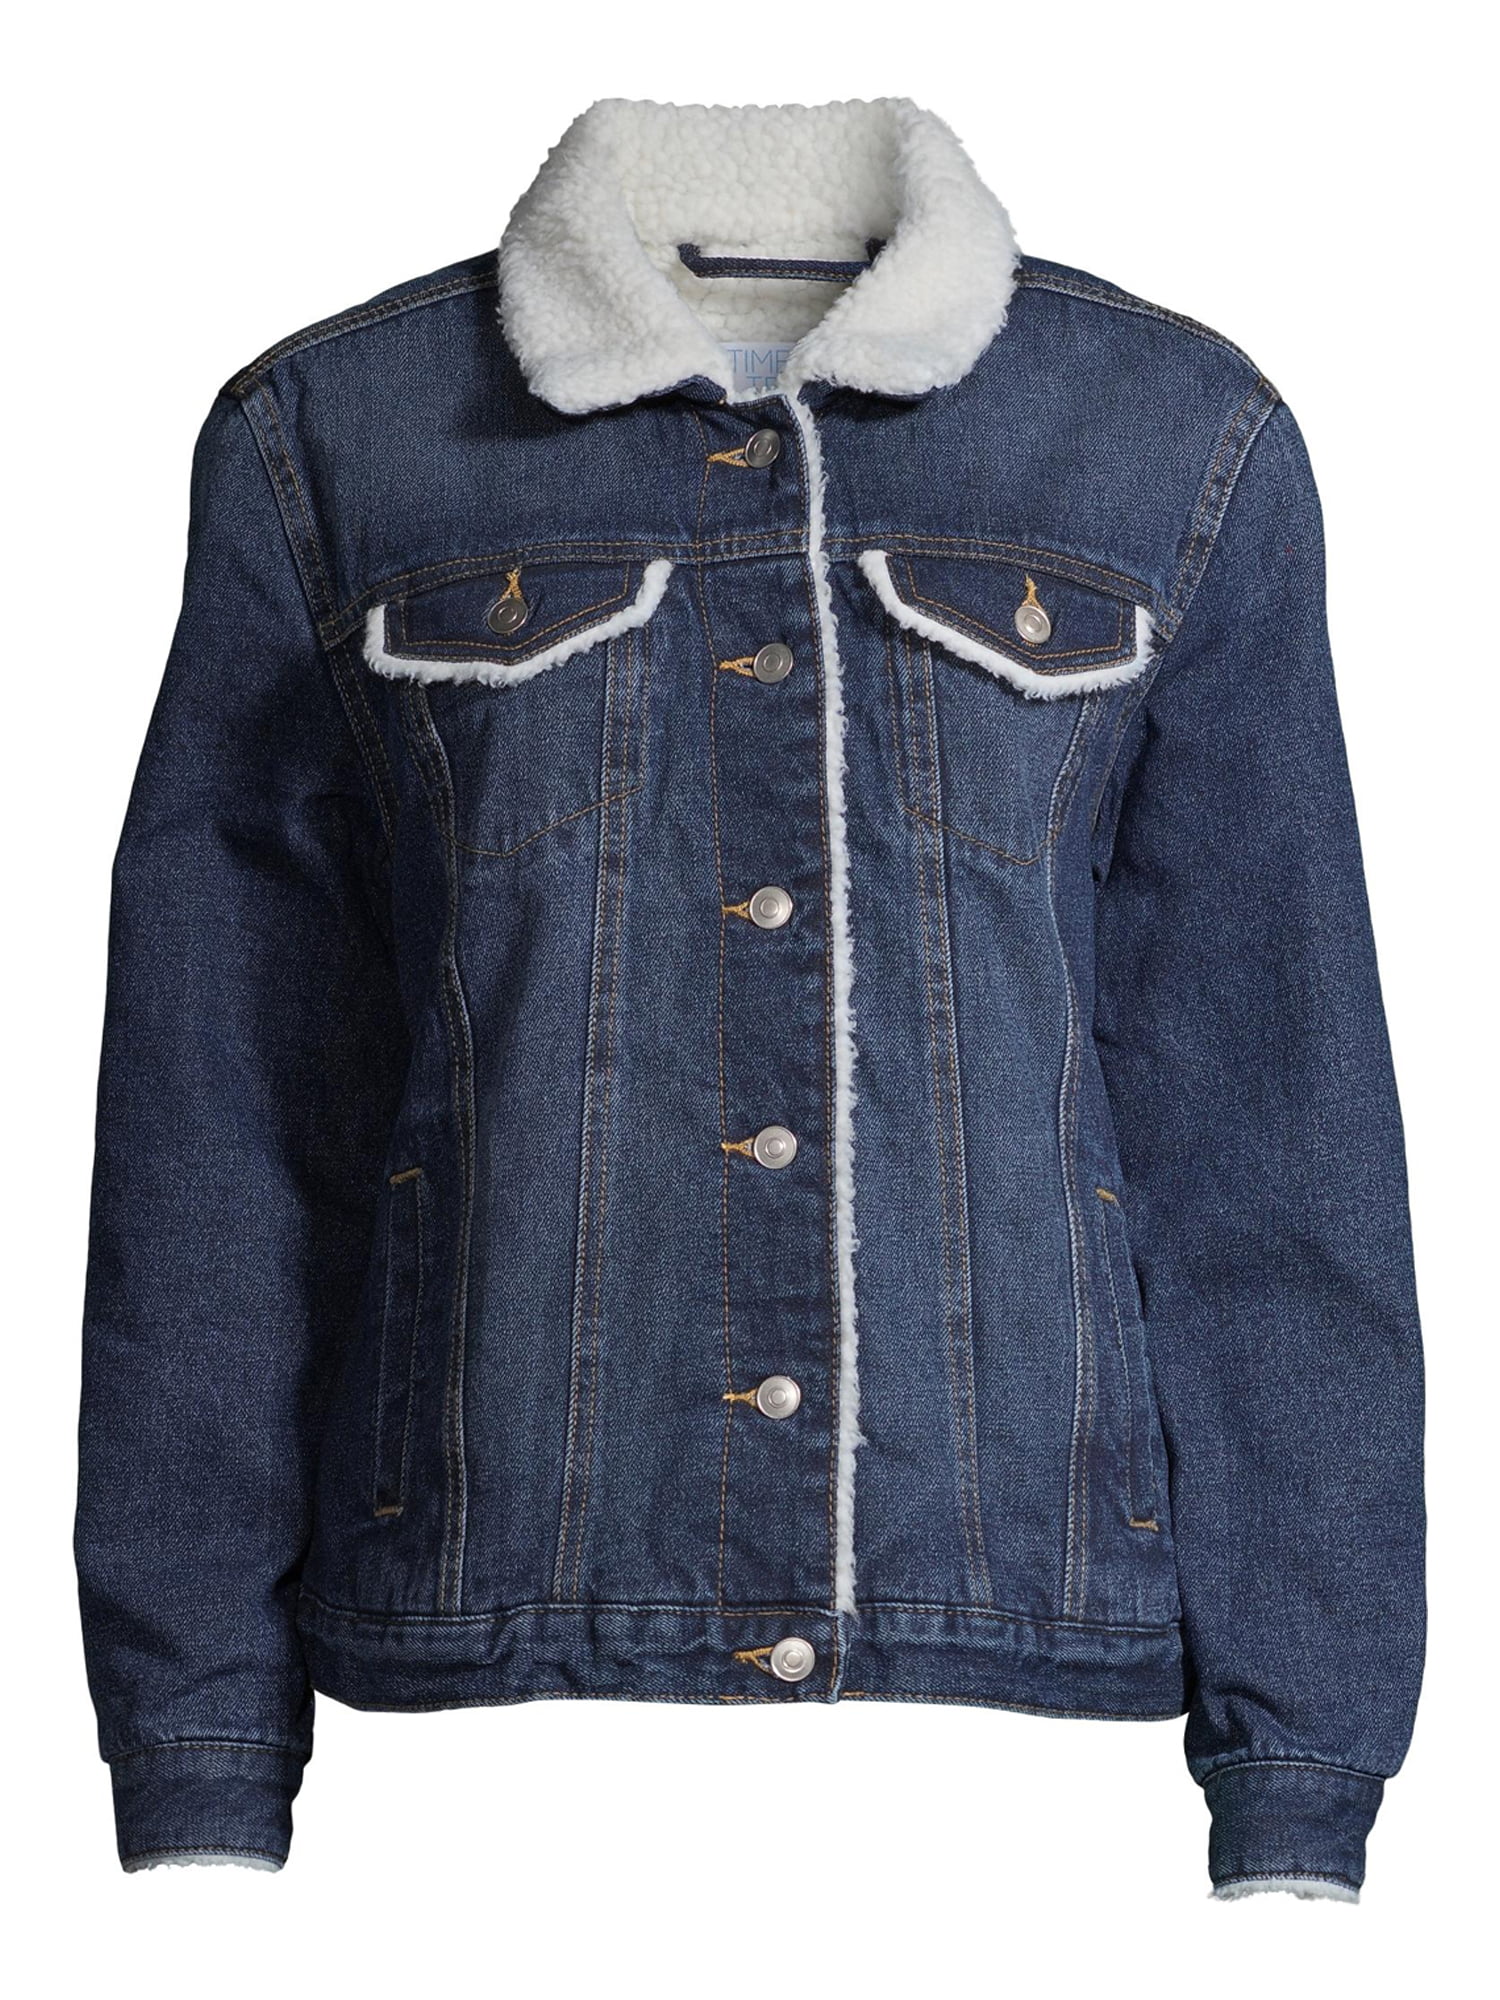 jean jacket with sherpa lining womens